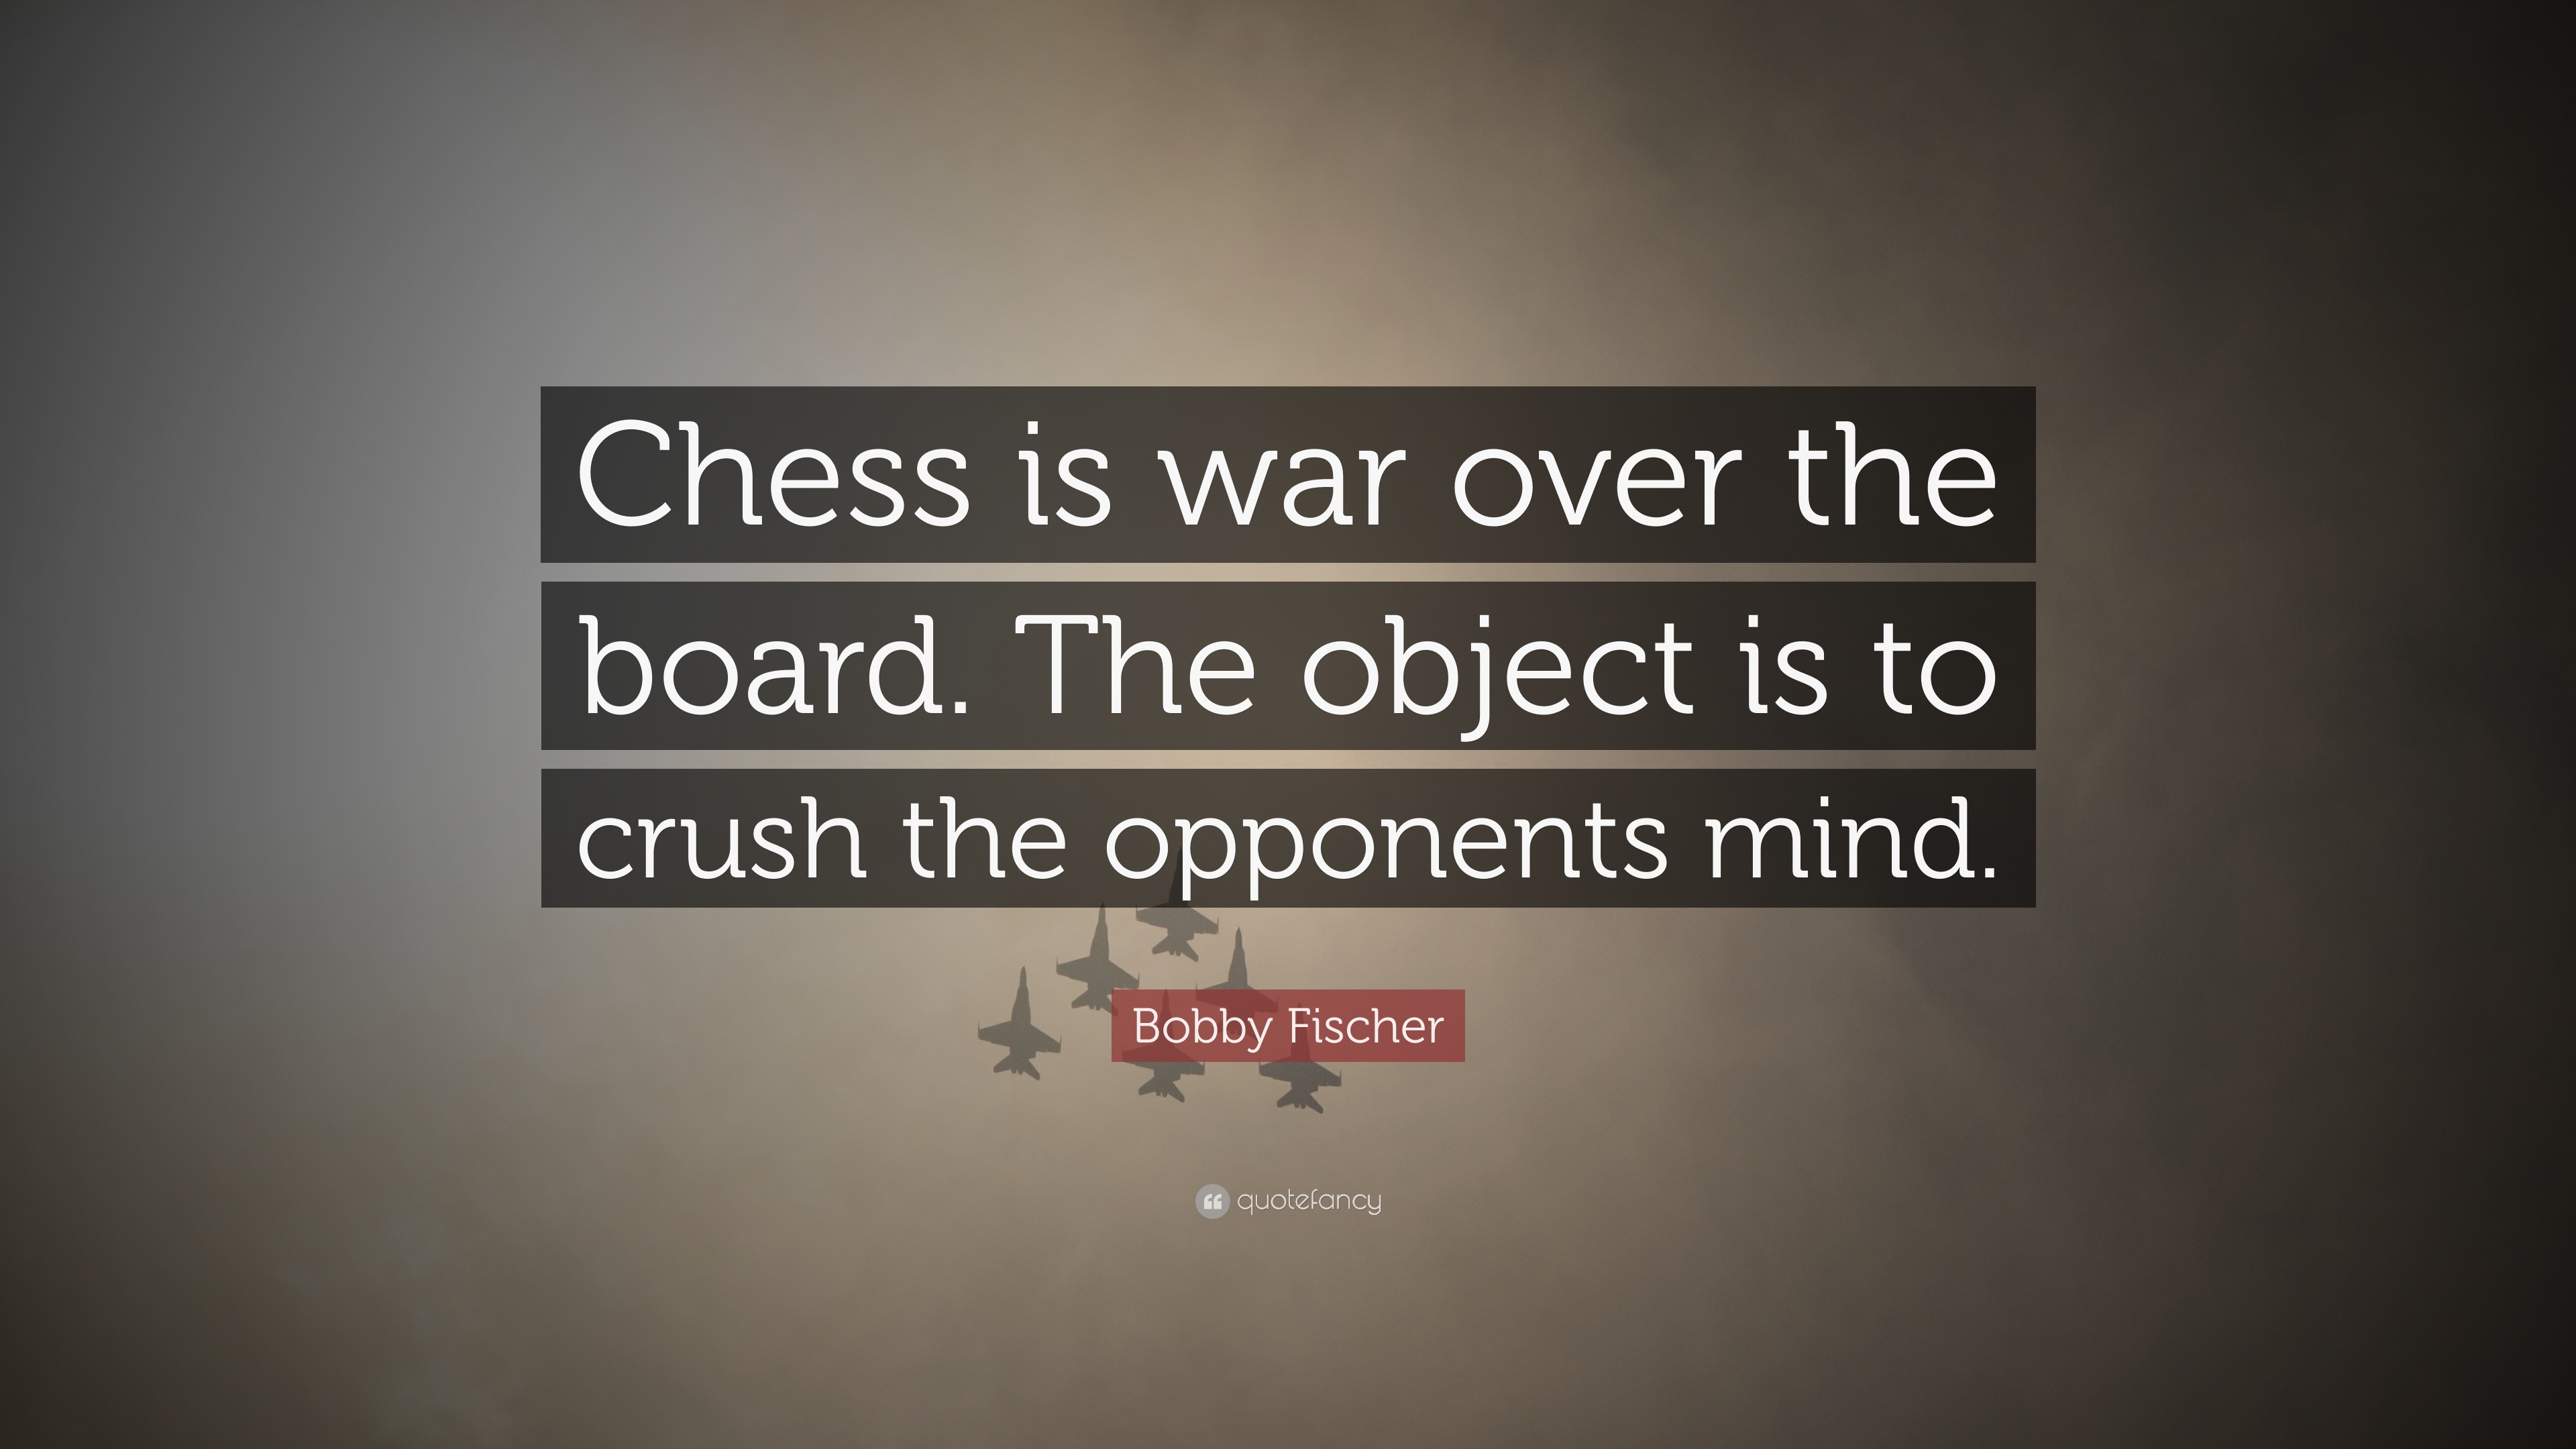 Bobby Fischer Quote: “Chess is war over the board. The object is to crush the opponents